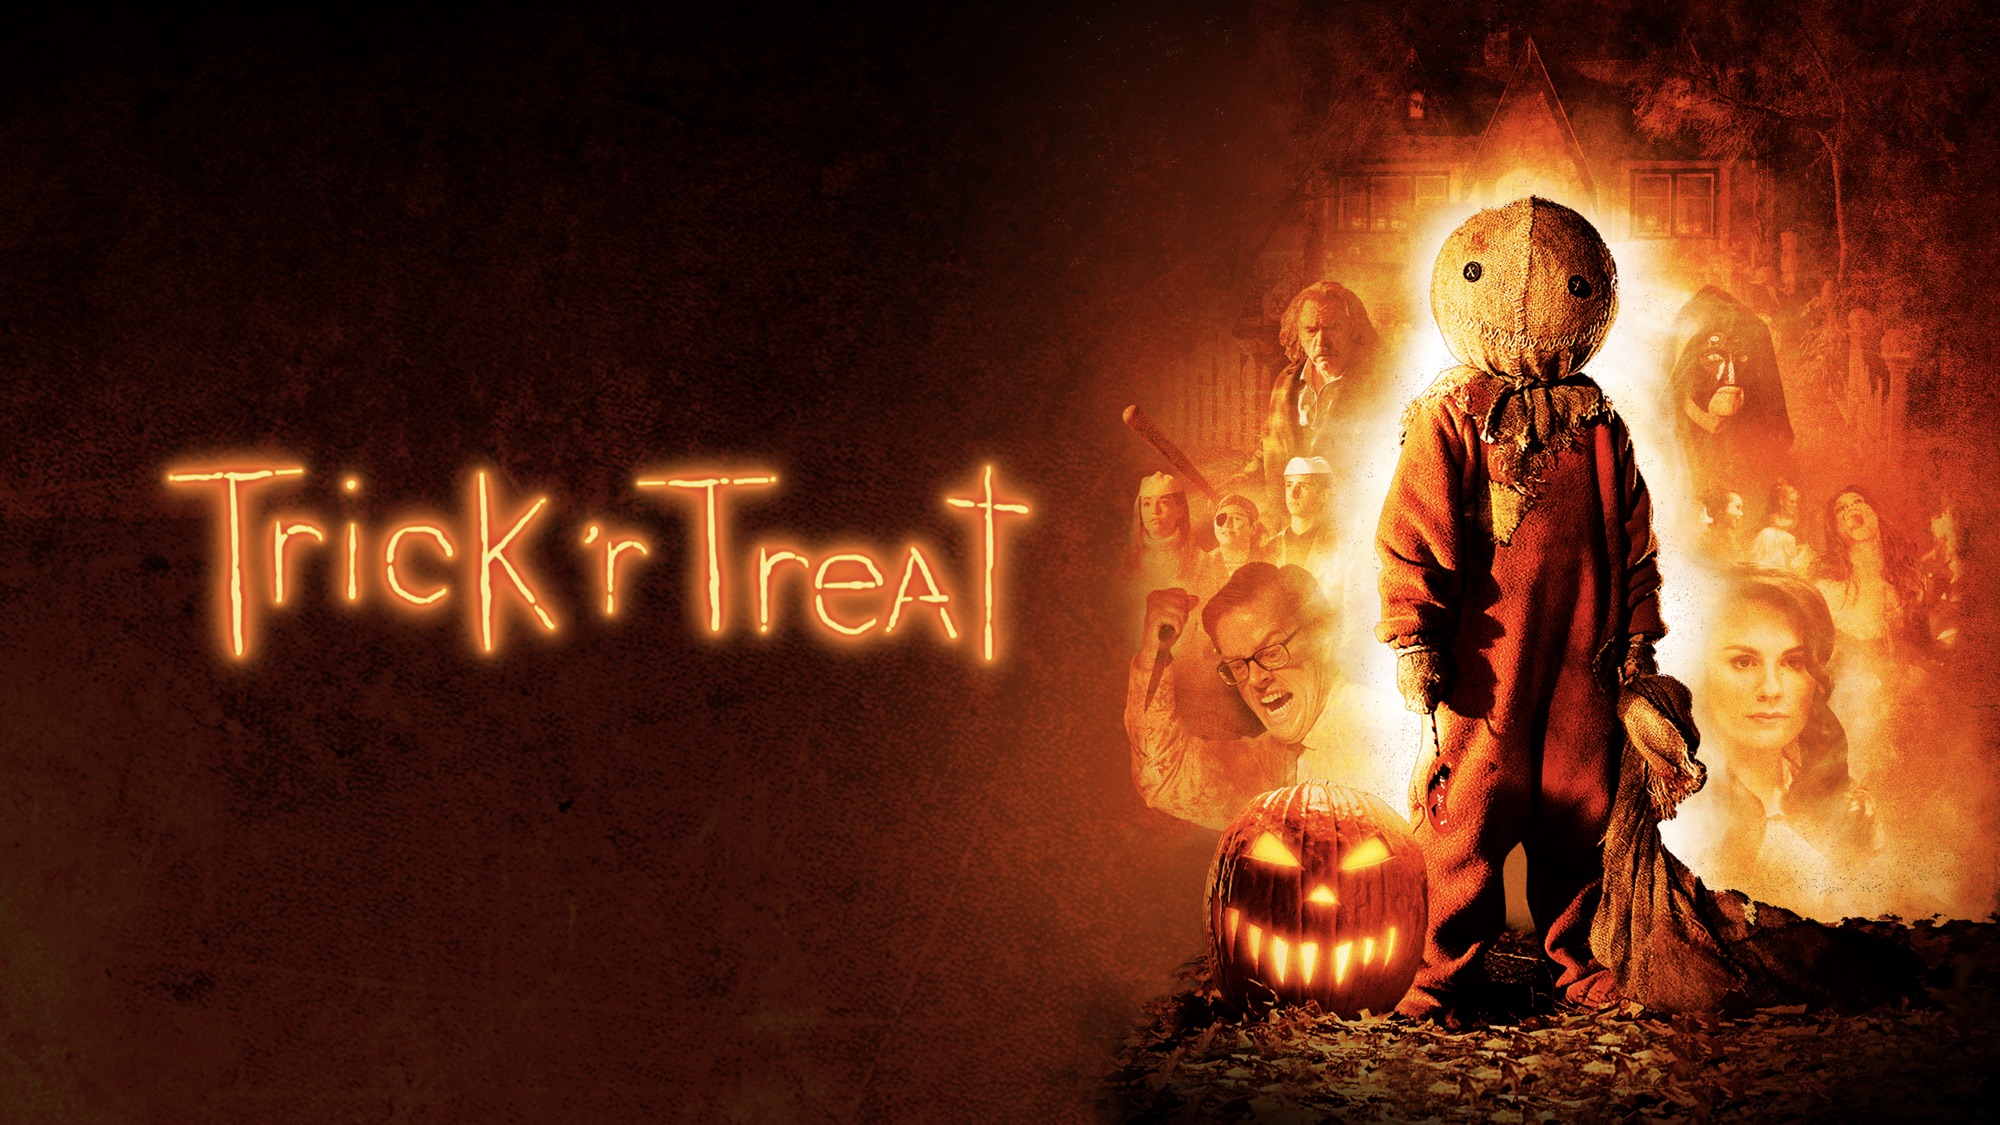 37 Facts about the movie Trick 'r Treat